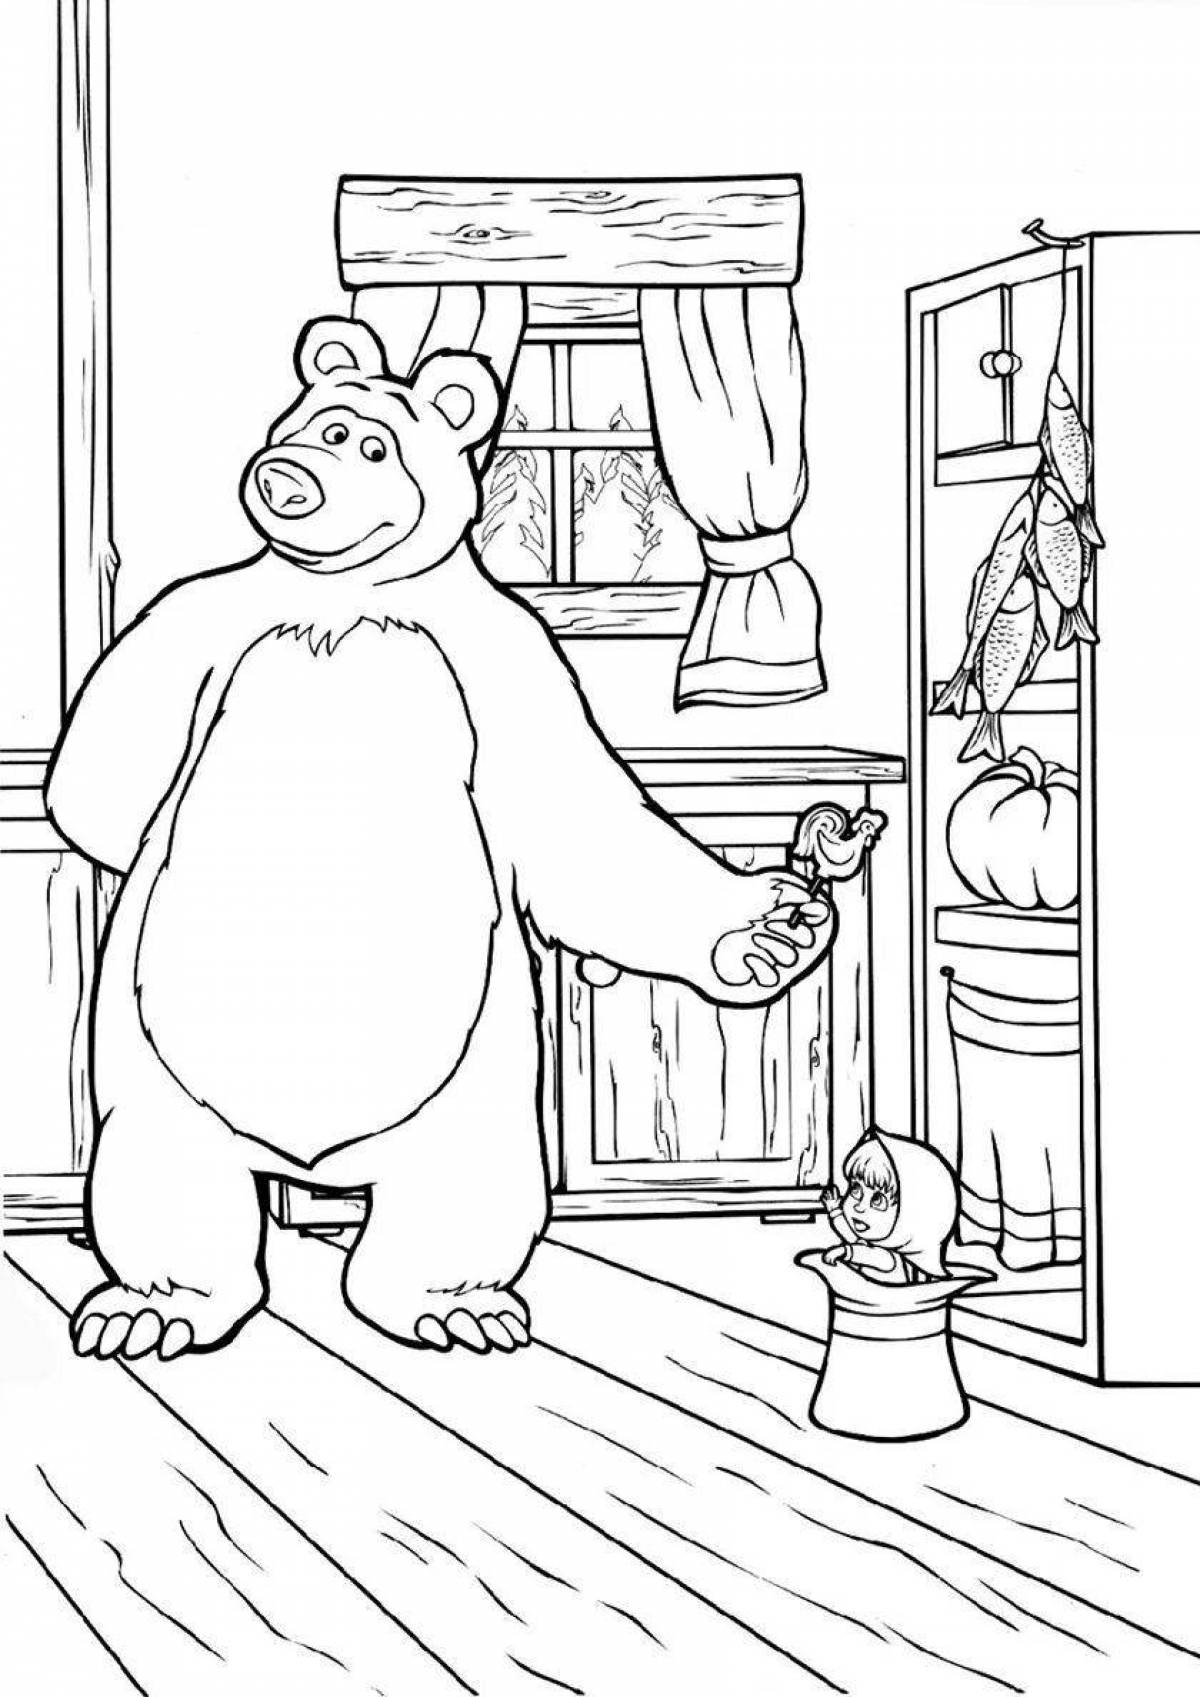 Coloring page mischievous bear from masha and bear